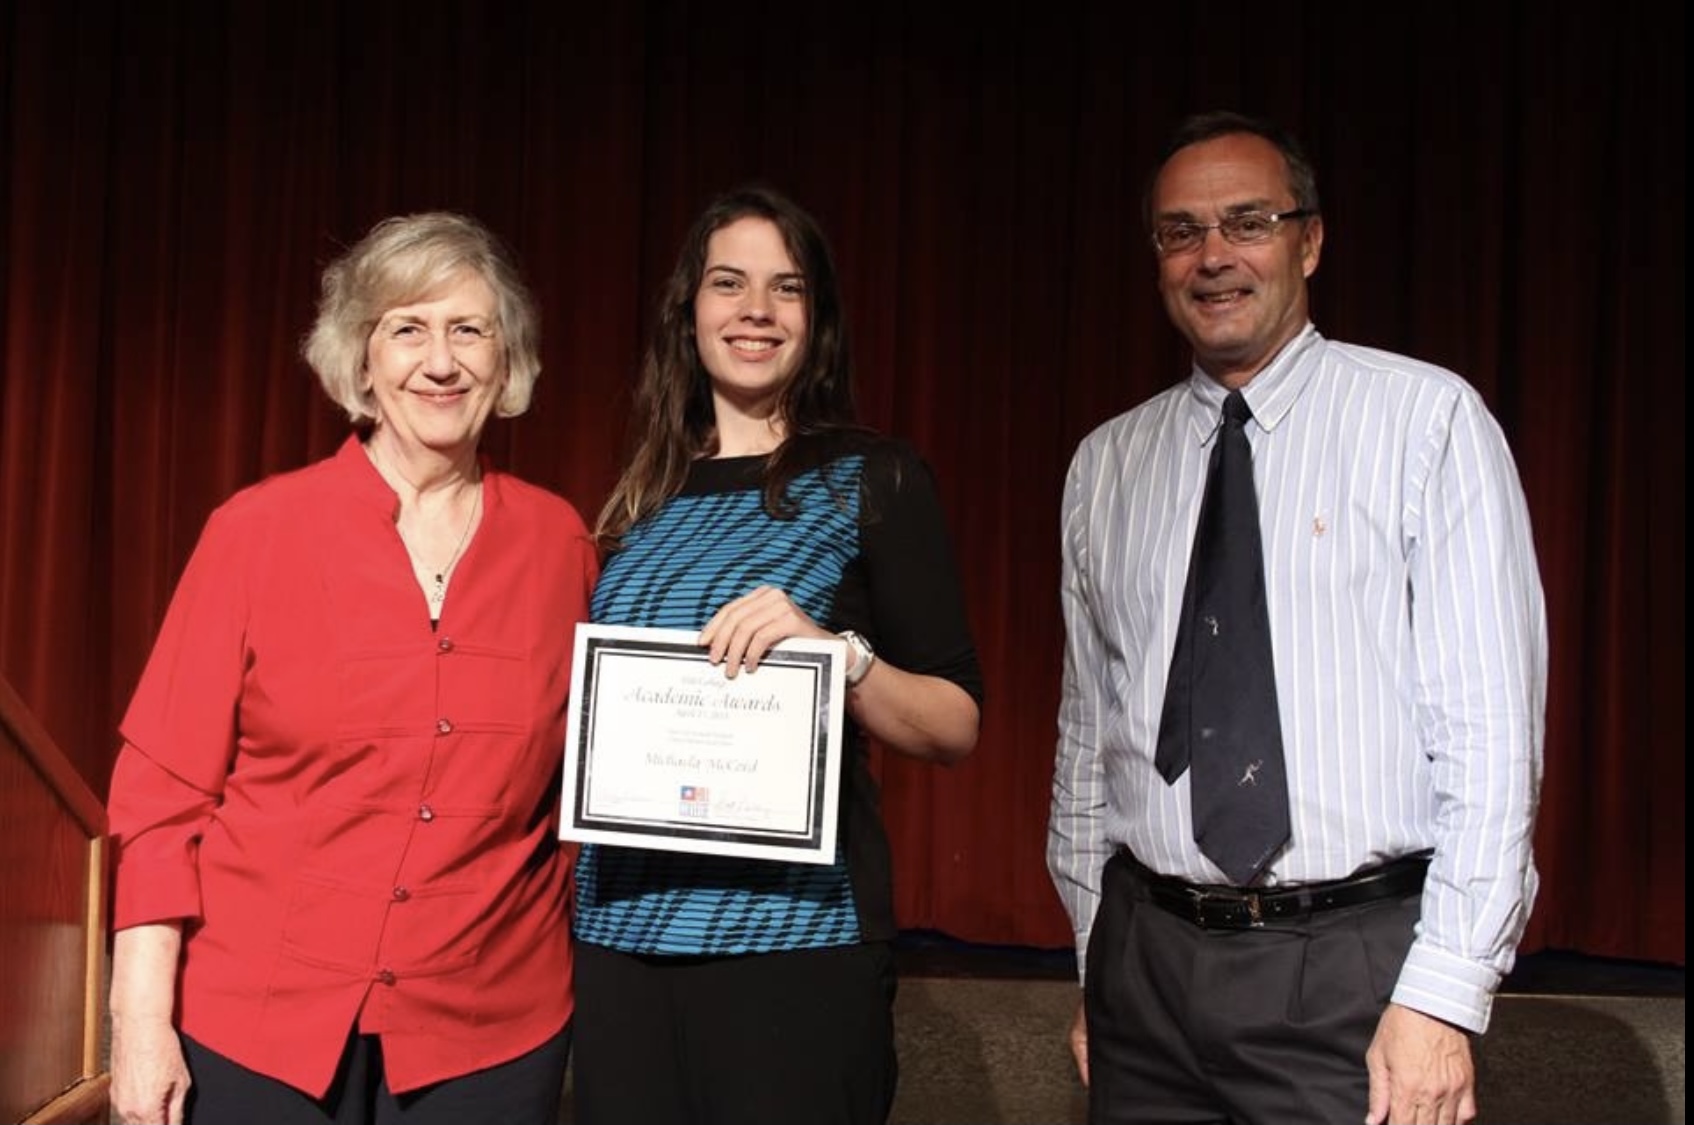 McCord receiving an award from Hill College choir director, Shirley Erickson, at the college's 2015 Spring Fling.